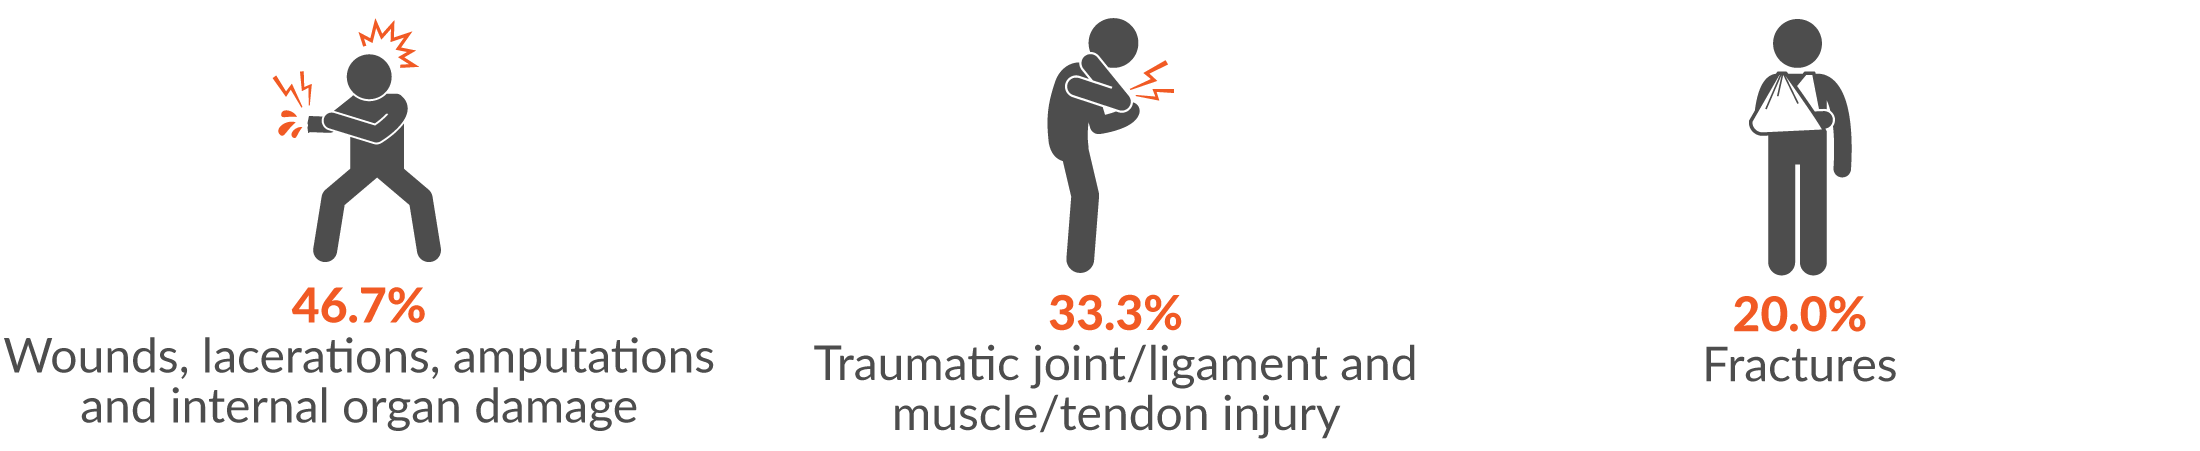 46.7% wounds, lacerations, amputations and internal organ damage; 33.3% traumatic joint/ligament and muscle/tendon injury and 20.0% fractures.